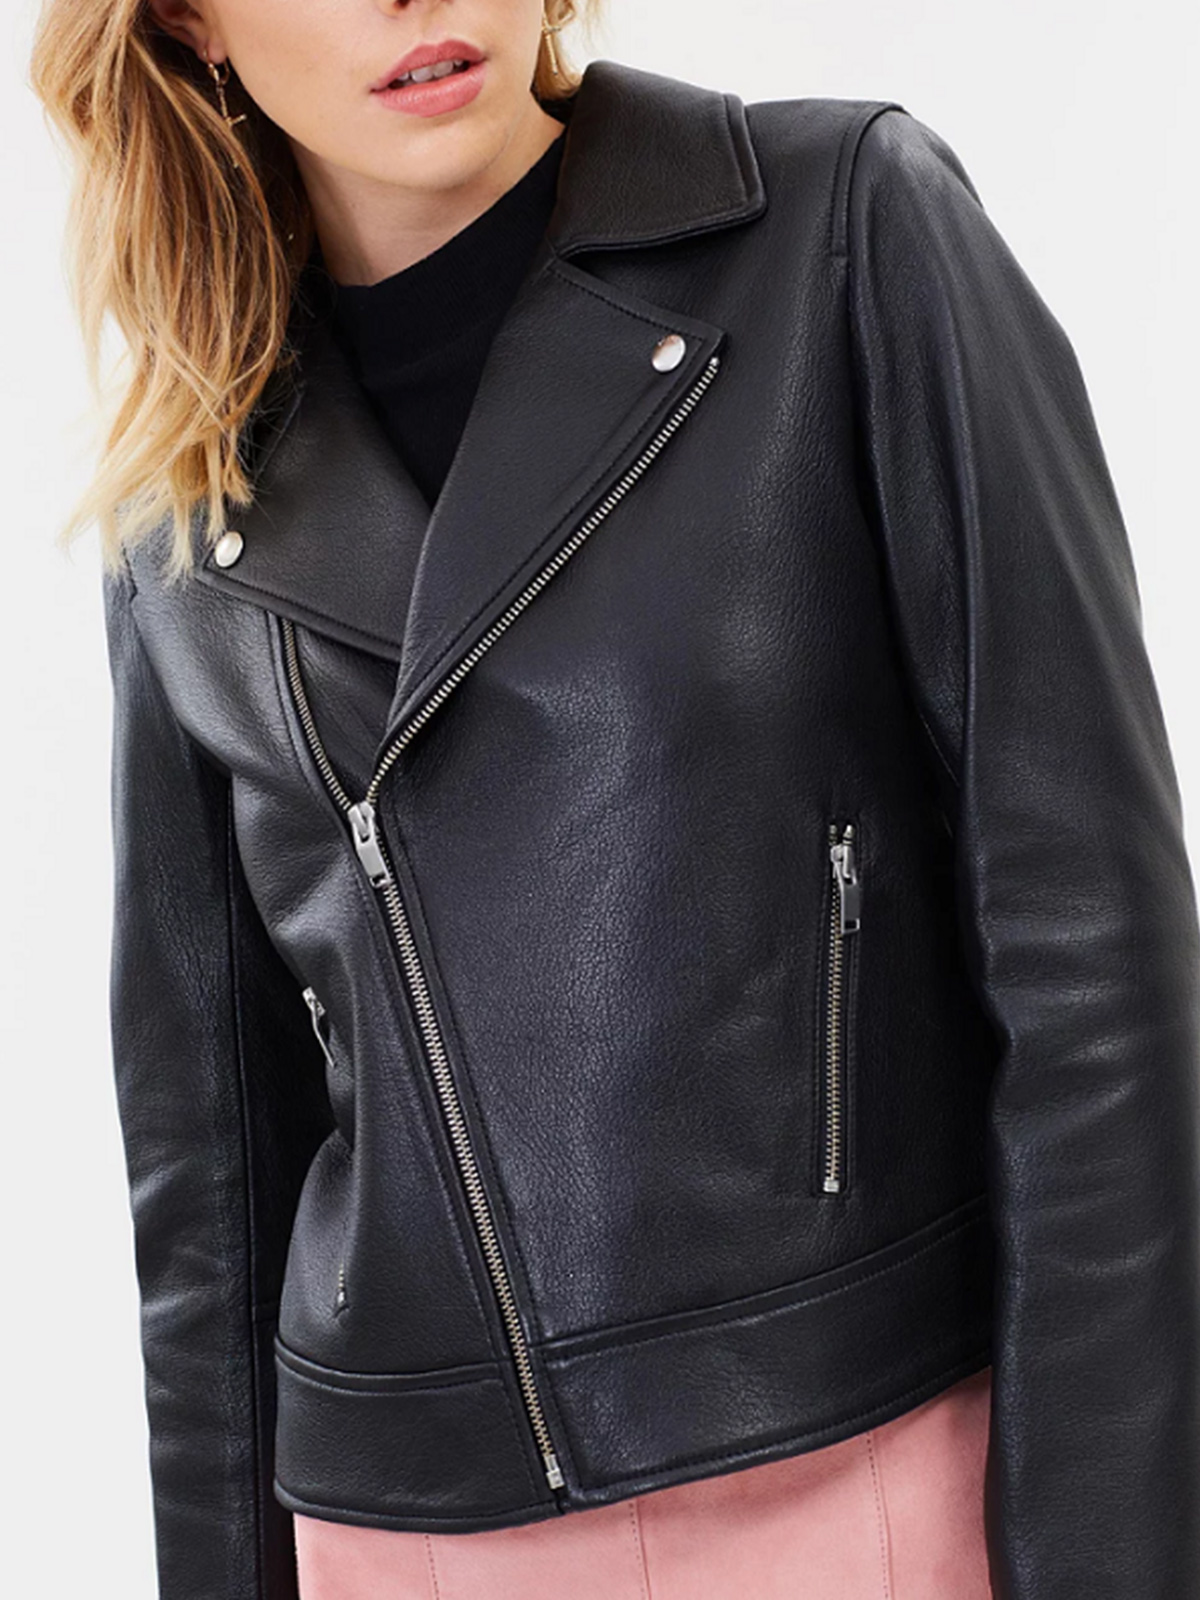 rockstar outfit ideas for ladies with black leather jacket